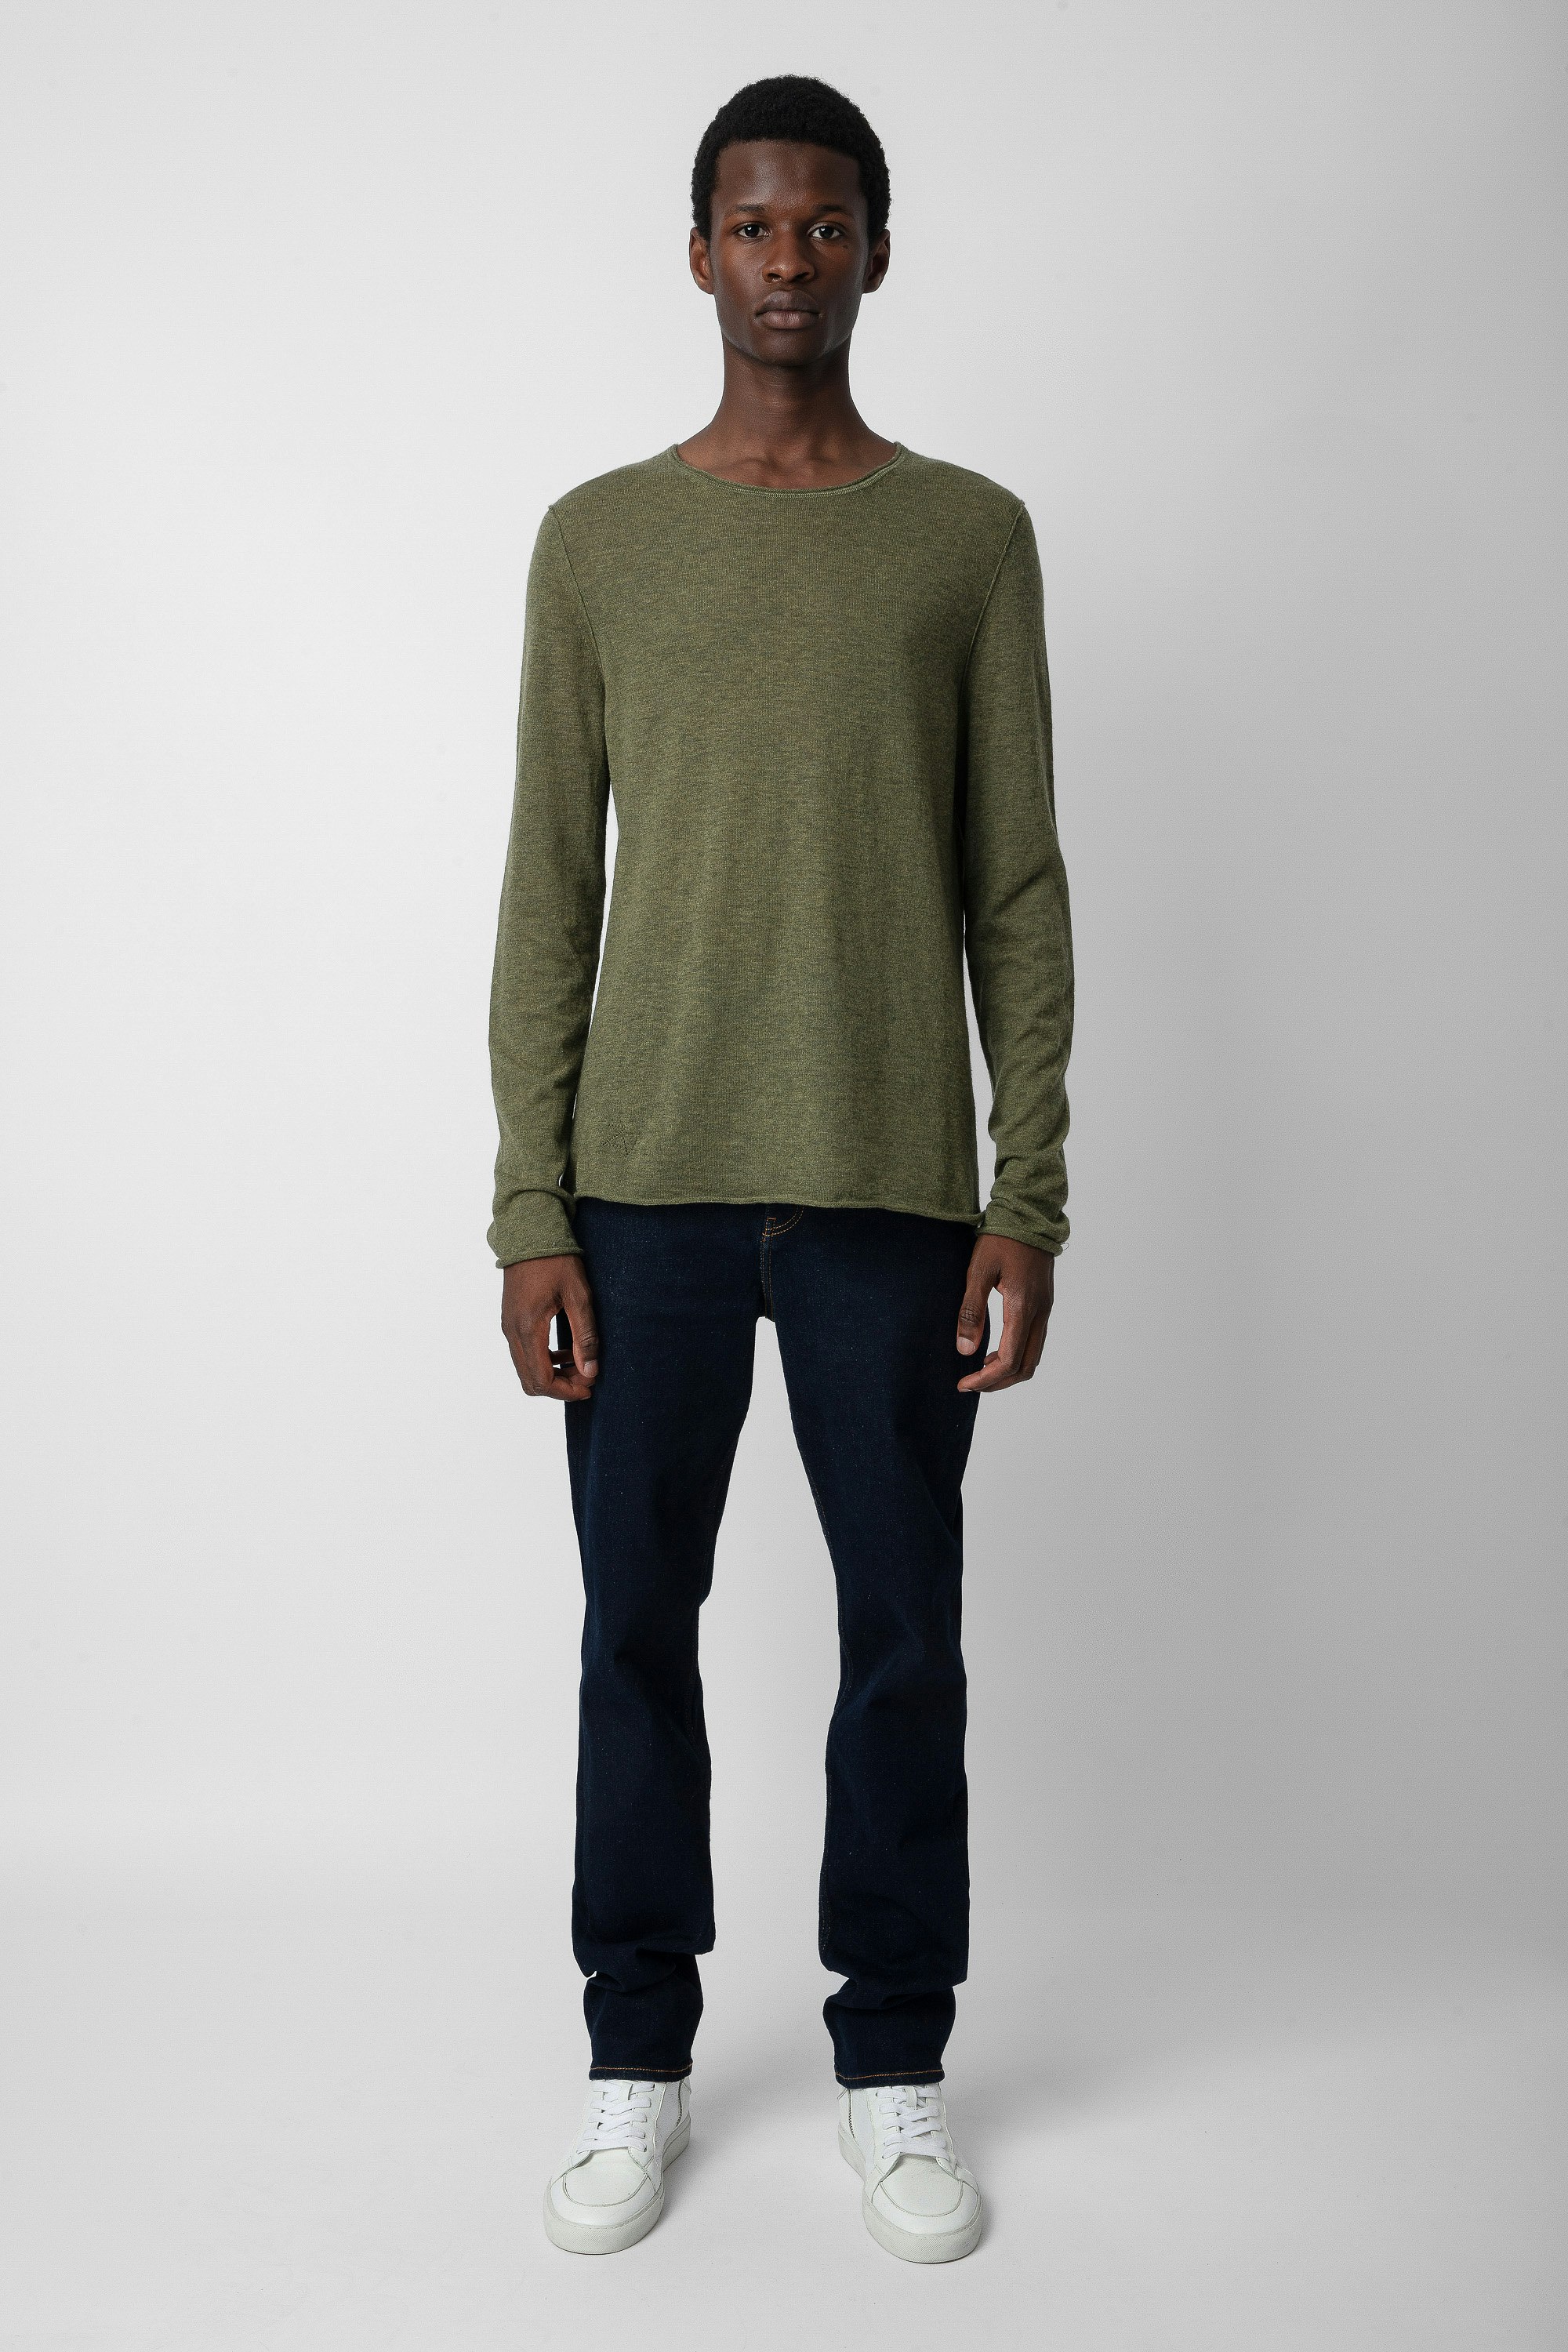 Teiss Cashmere Sweater - Men’s khaki feather cashmere sweater.